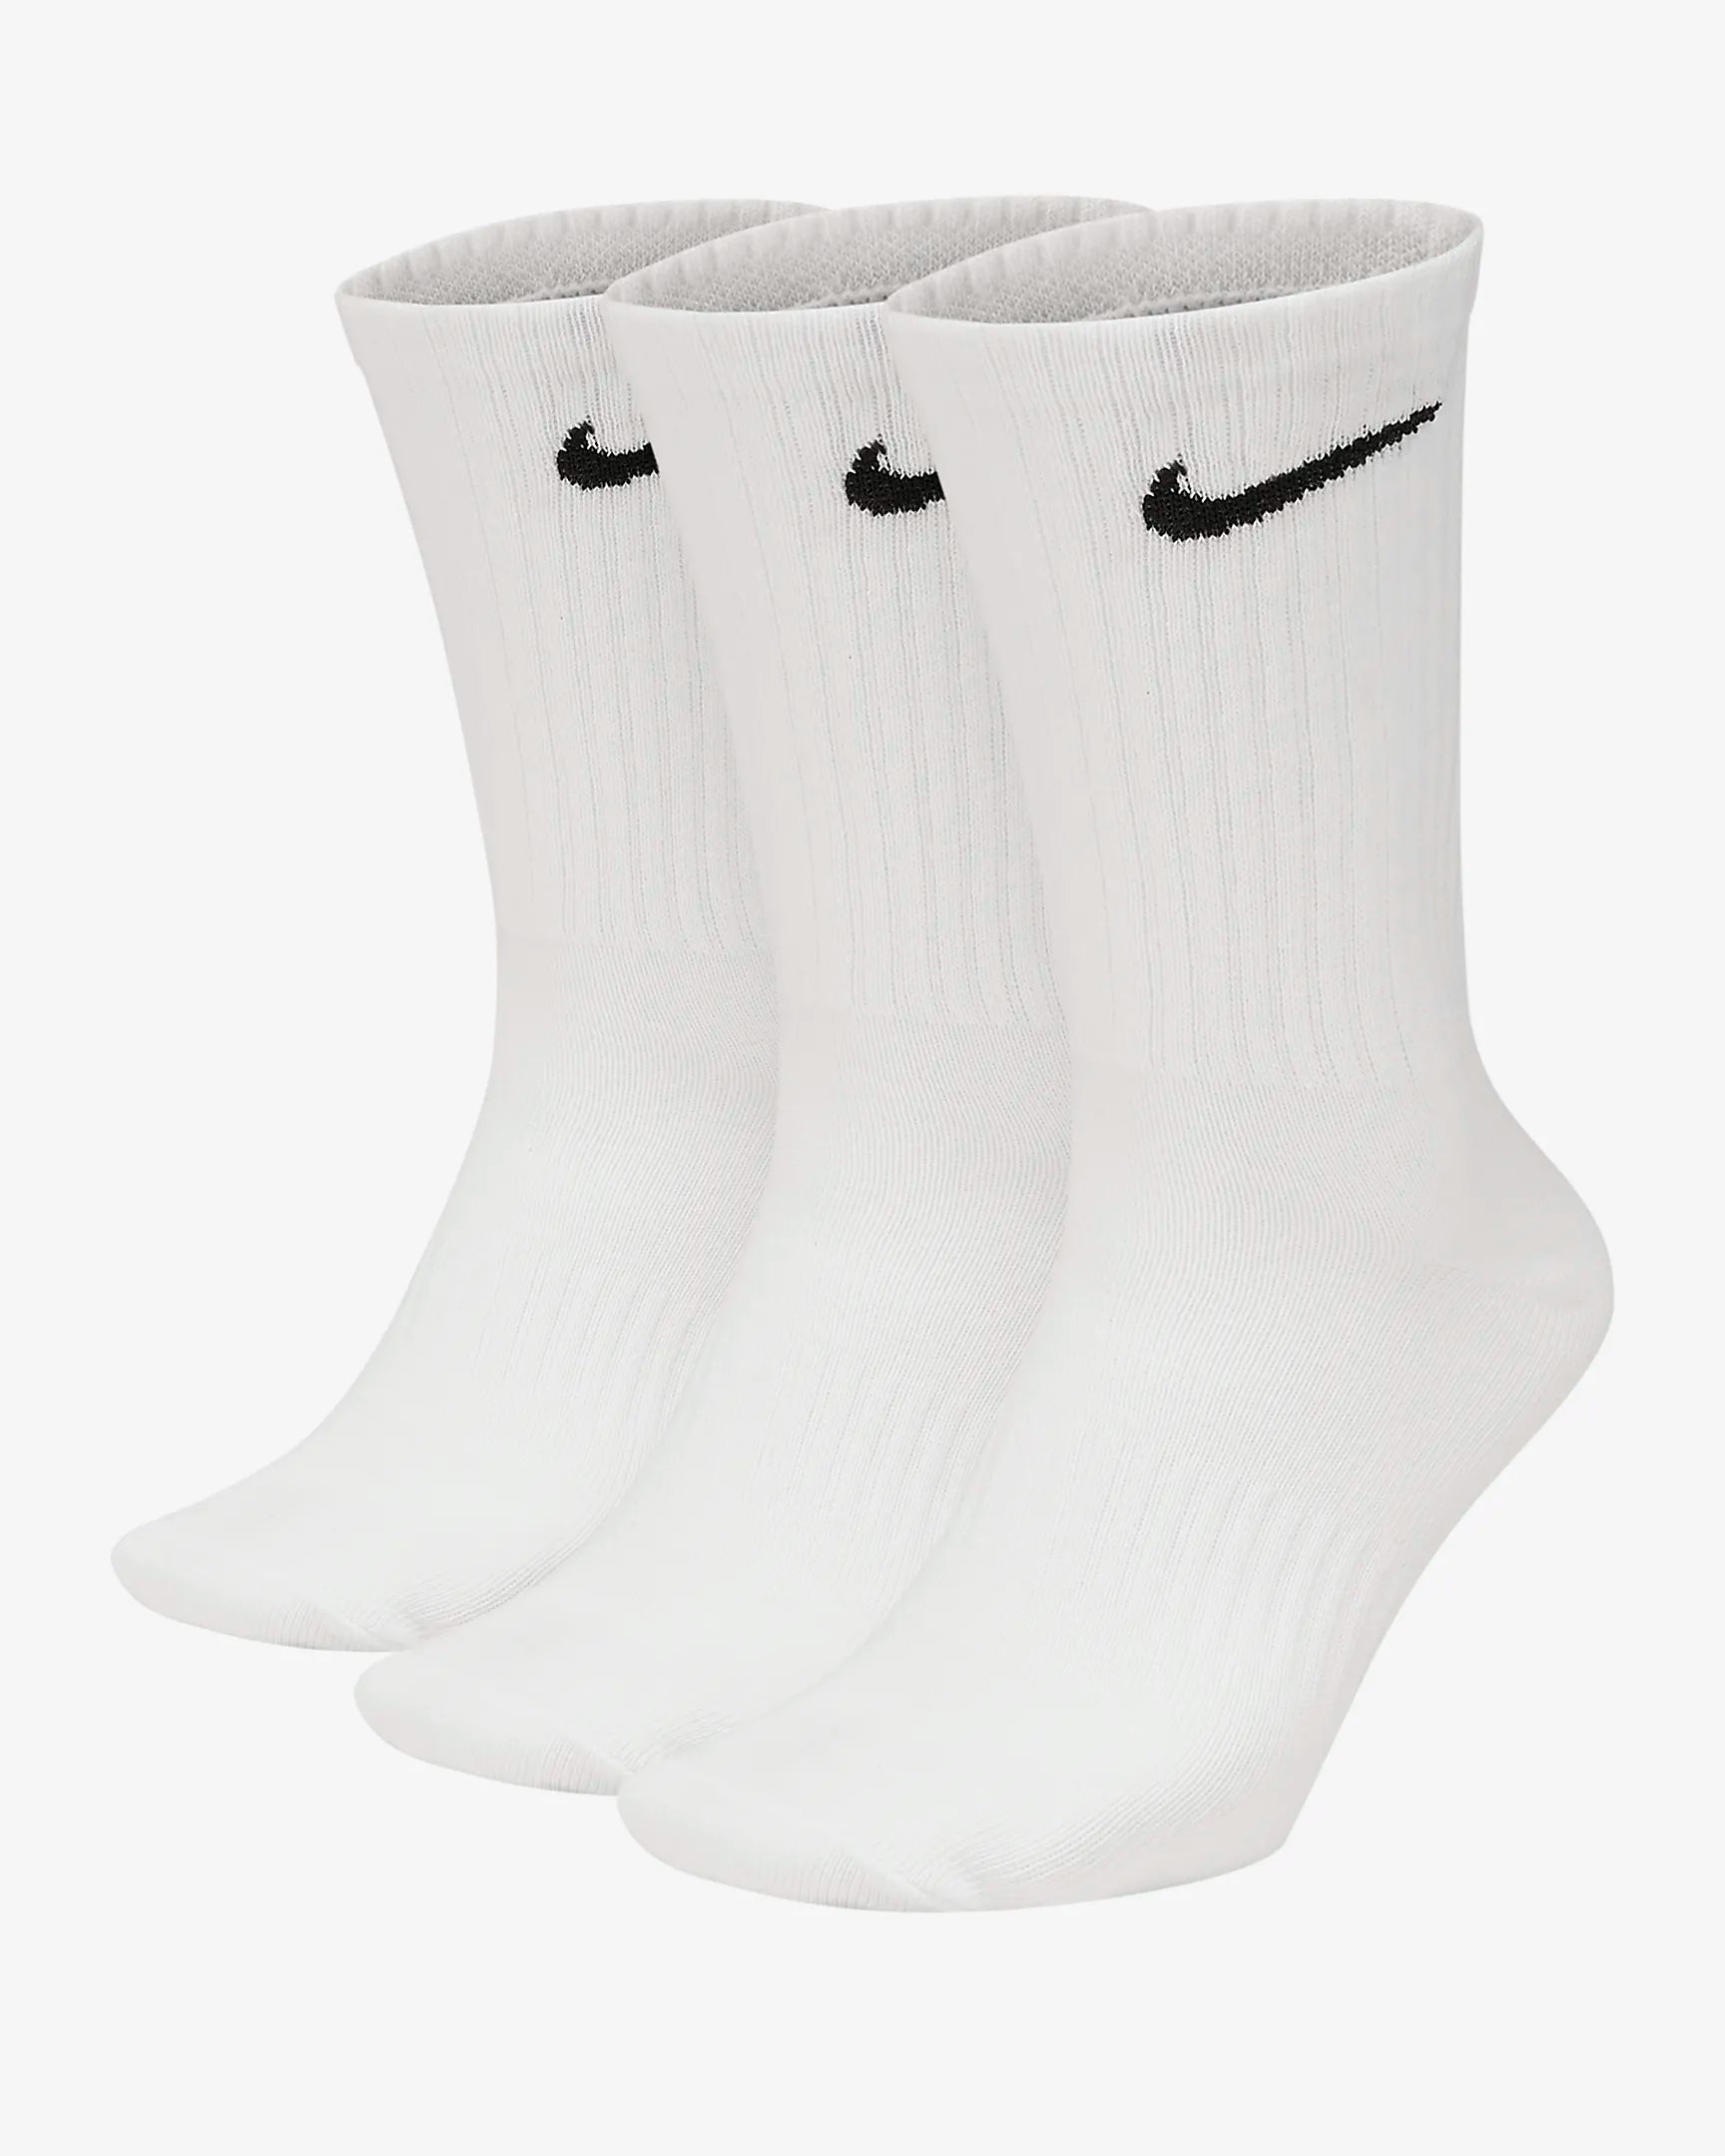 Nike White Everyday Lightweight Cotton Cushioned Crew Socks 3 Pack - Genuine Design Luxury Consignment for Men. New & Pre-Owned Clothing, Shoes, & Accessories. Calgary, Canada